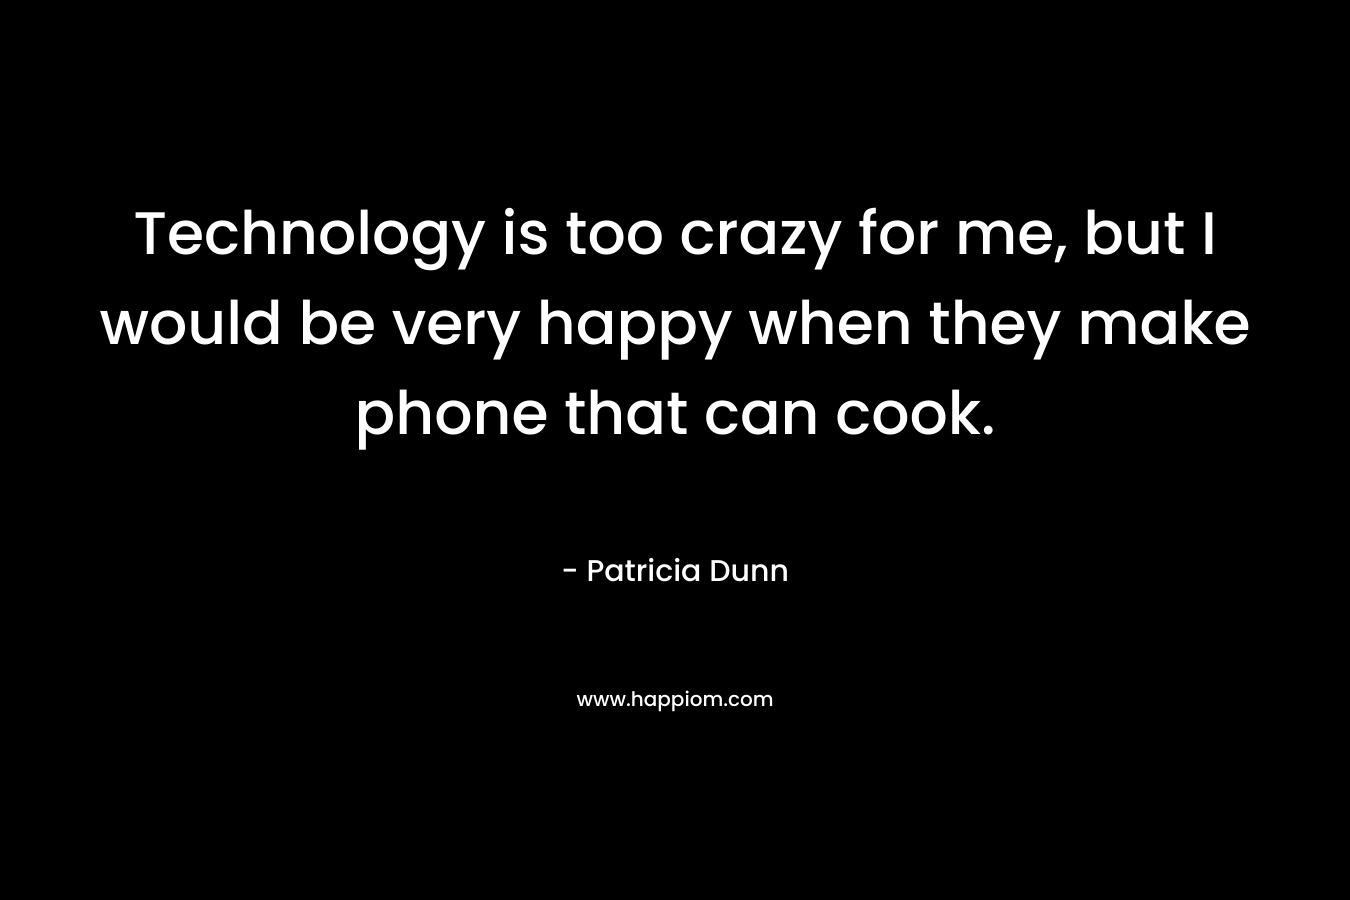 Technology is too crazy for me, but I would be very happy when they make phone that can cook.